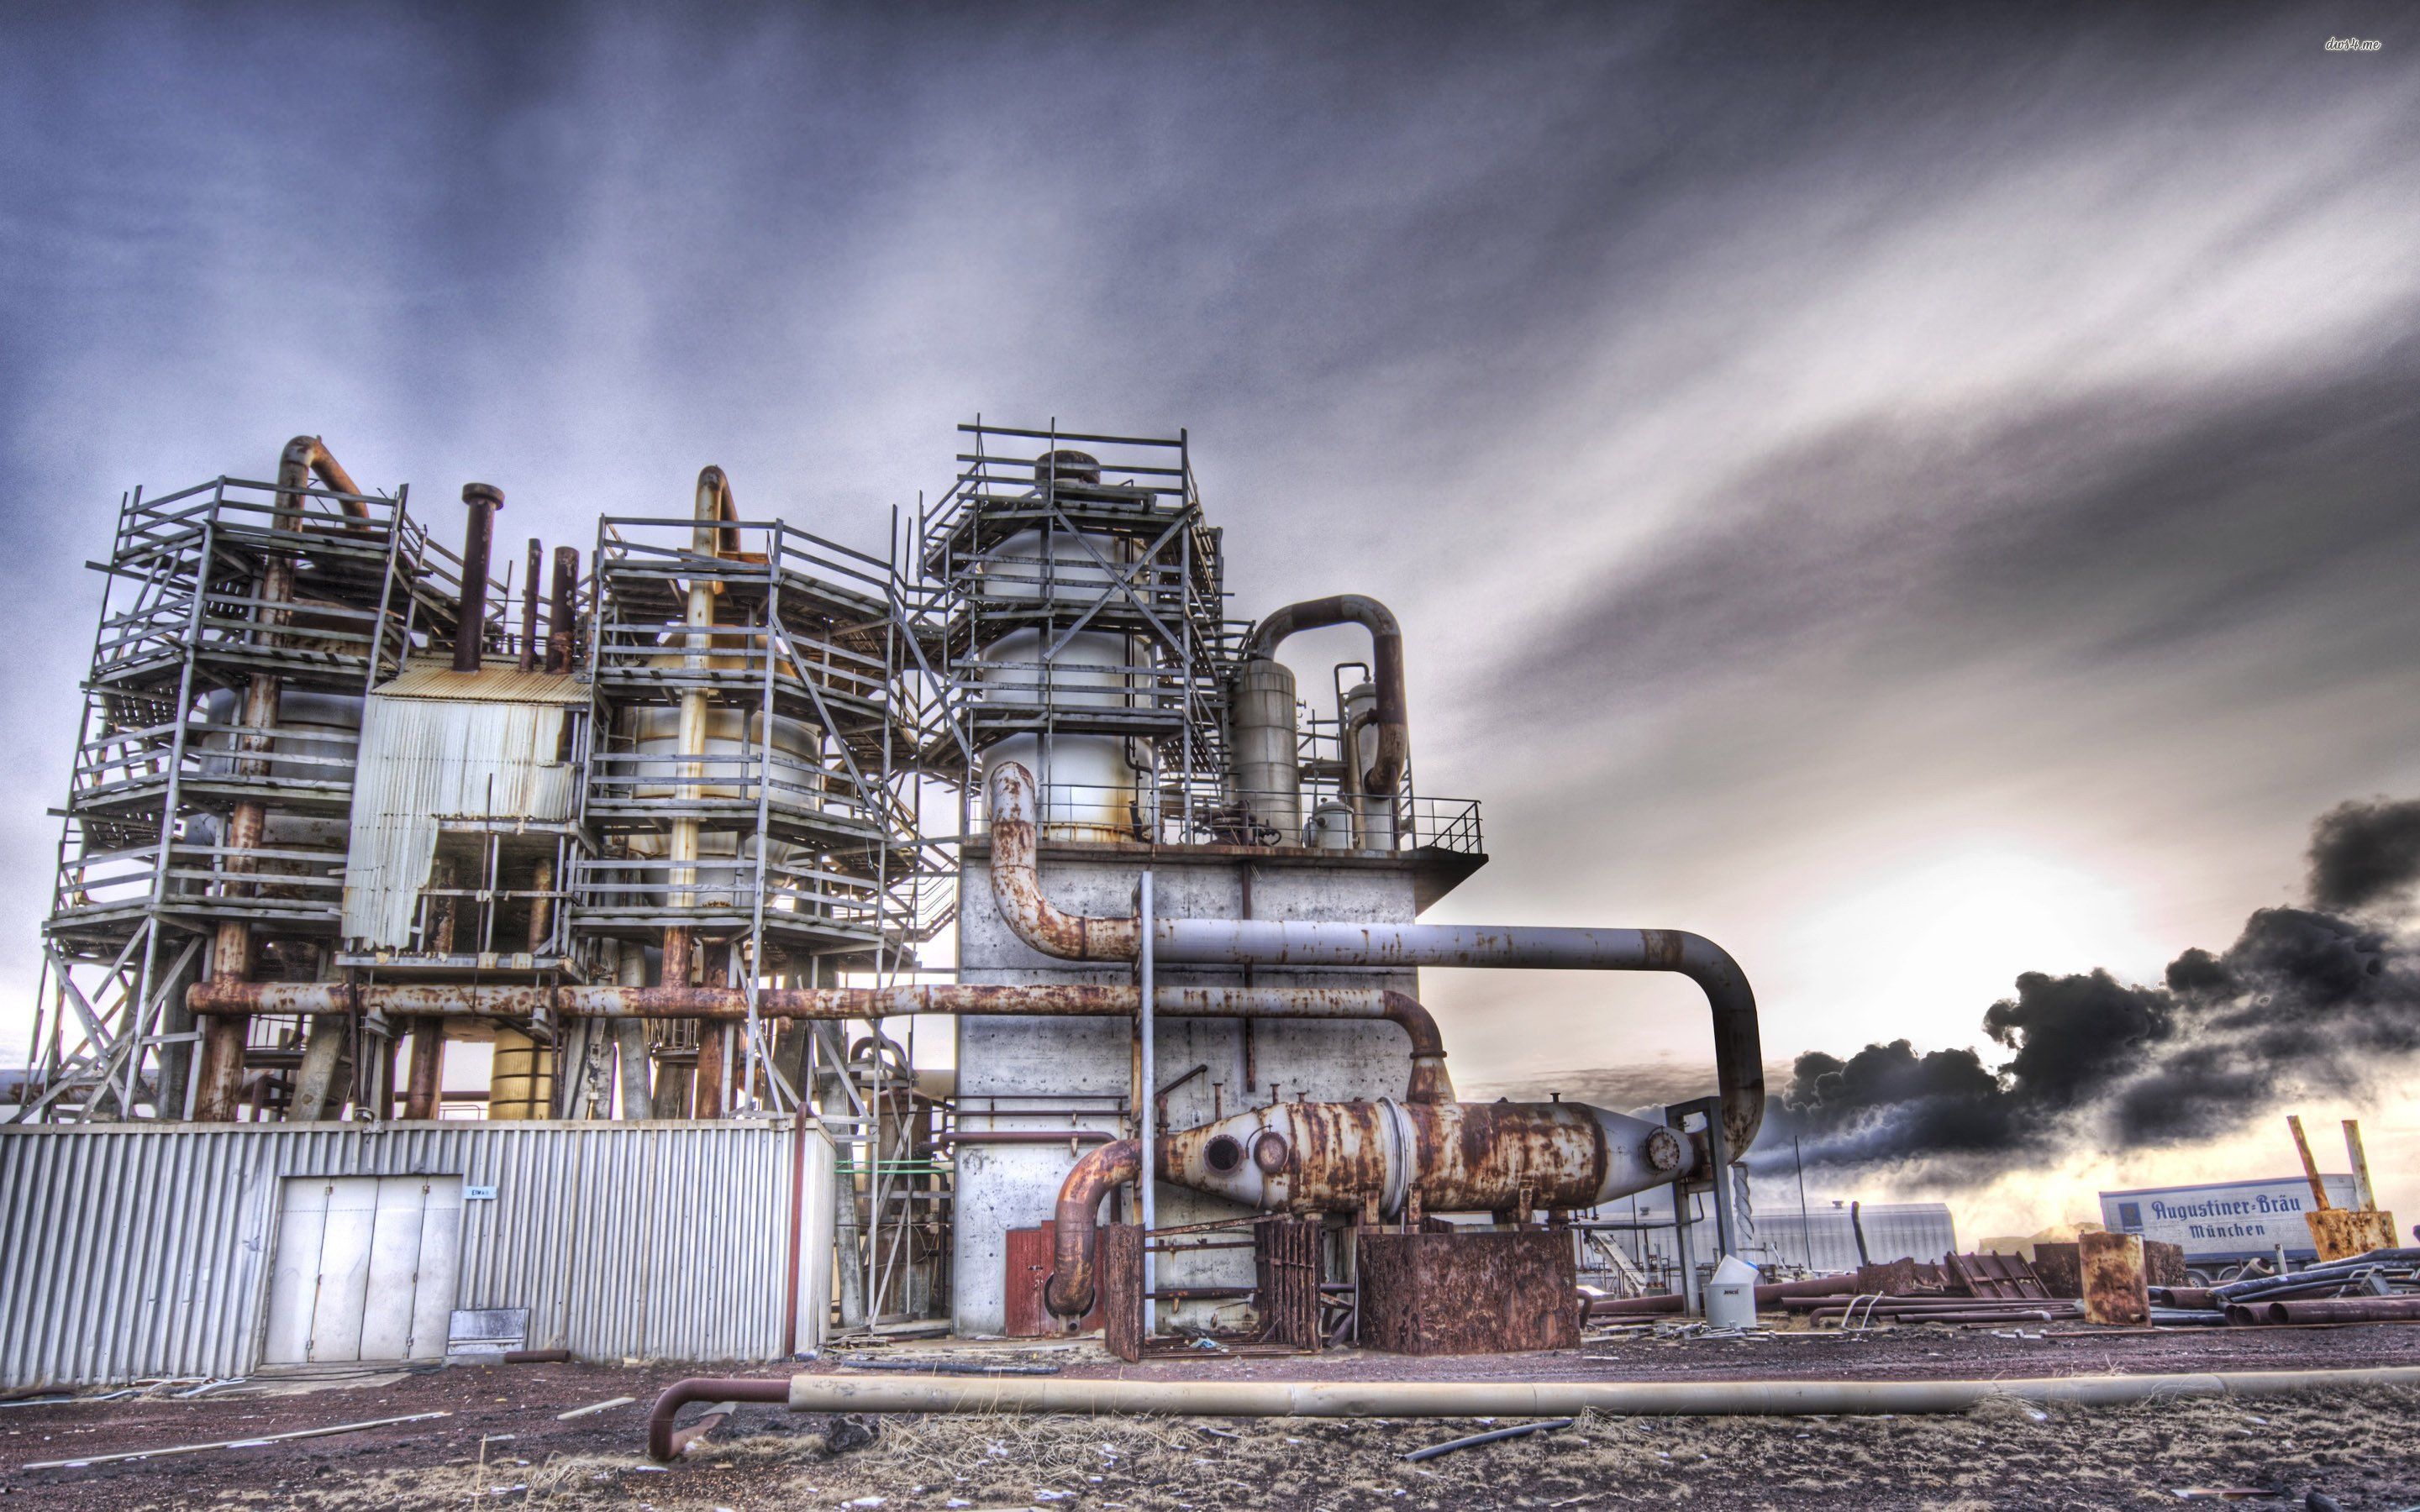 Power Plant Wallpaper. Power plant, Industrial architecture, Geothermal